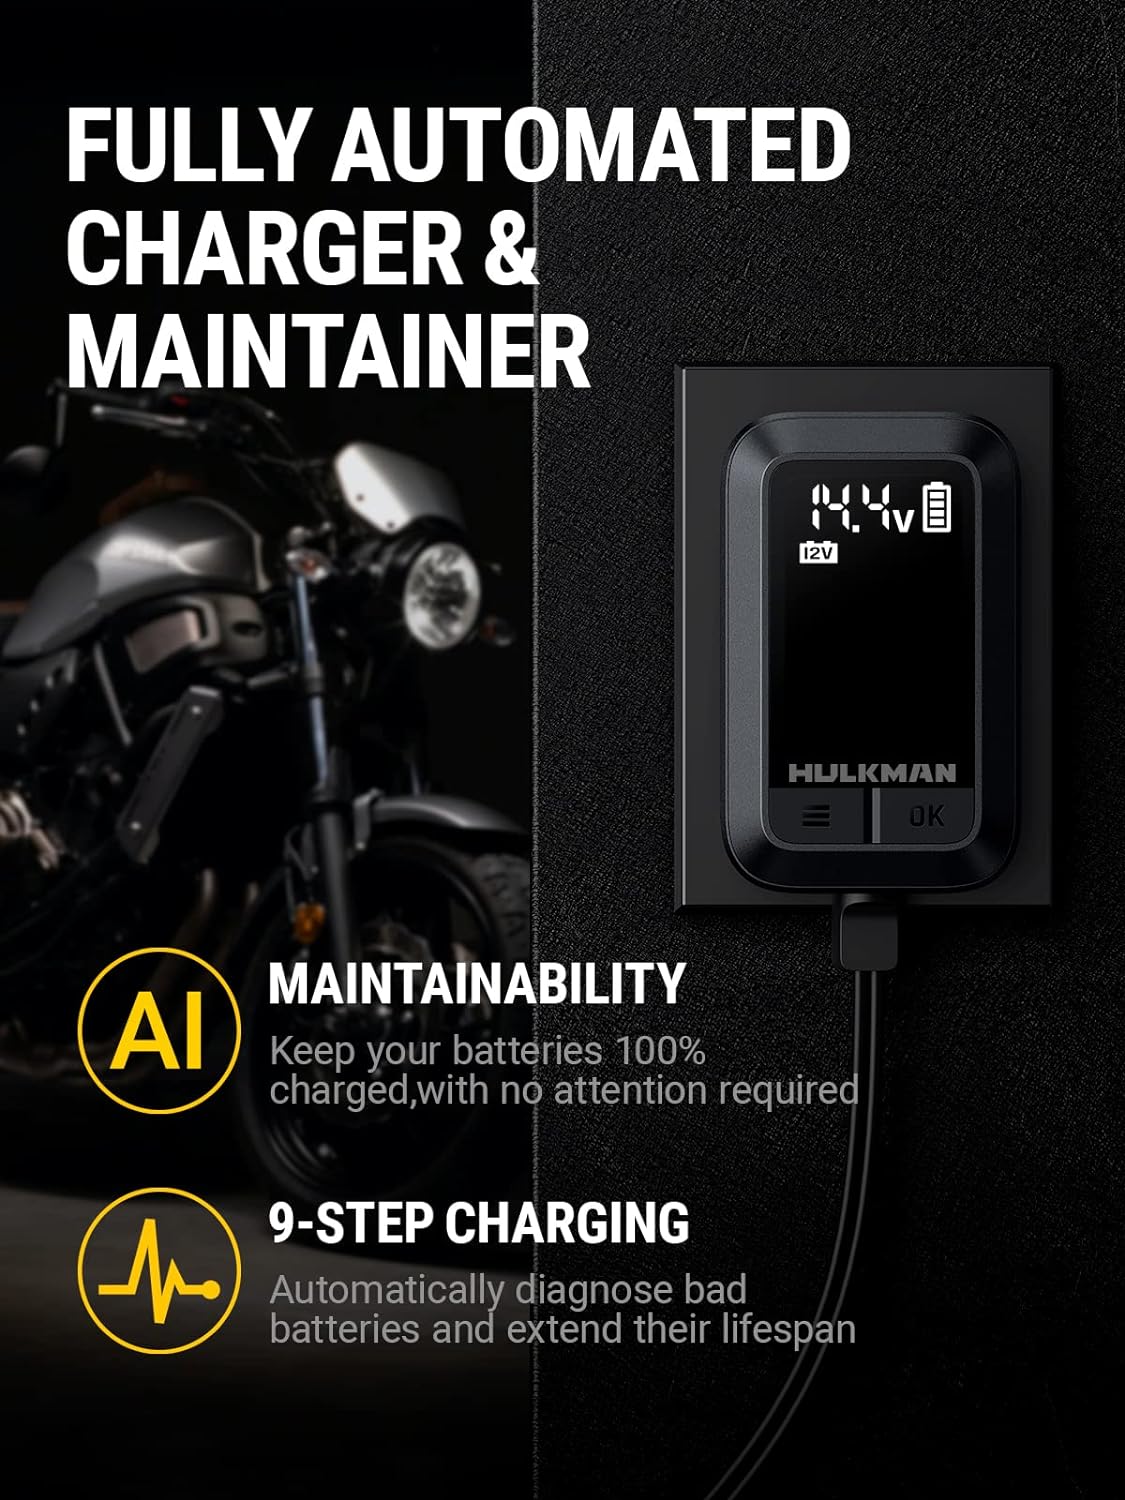 HULKMAN Sigma 1 Car Battery Charger, 1A 6V/12V Automatic Smart Trickle Charger, Battery Maintainer, and Desulfator with Intelligent Interface - HULKMAN Sigma 1 Car Battery Charger Review